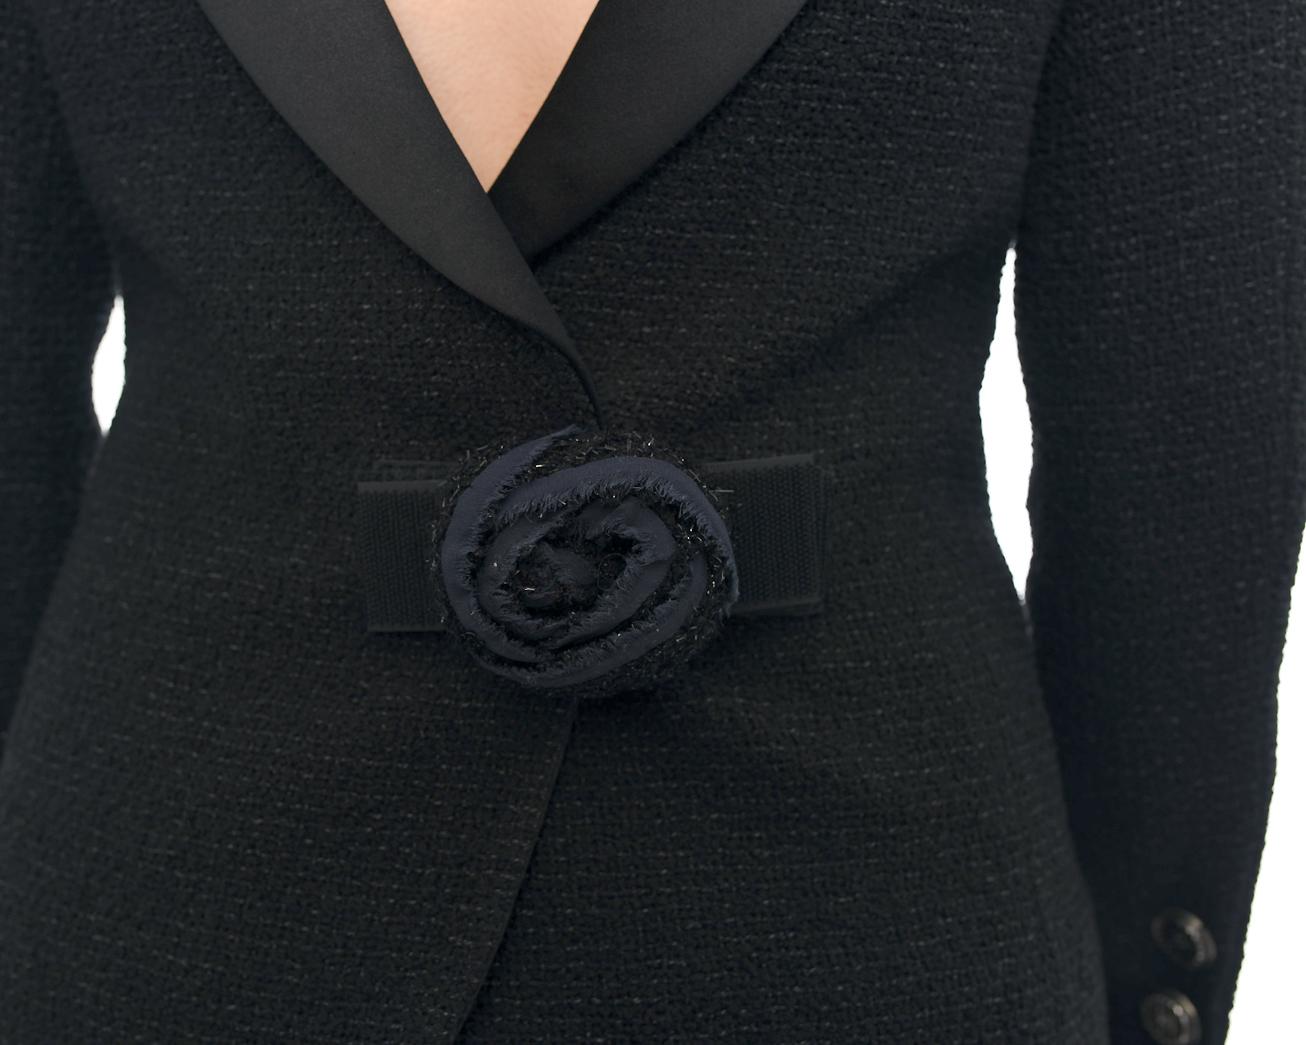 Chanel 17S Black Tweed Jacket with V Back and Satin Collar - 6 4